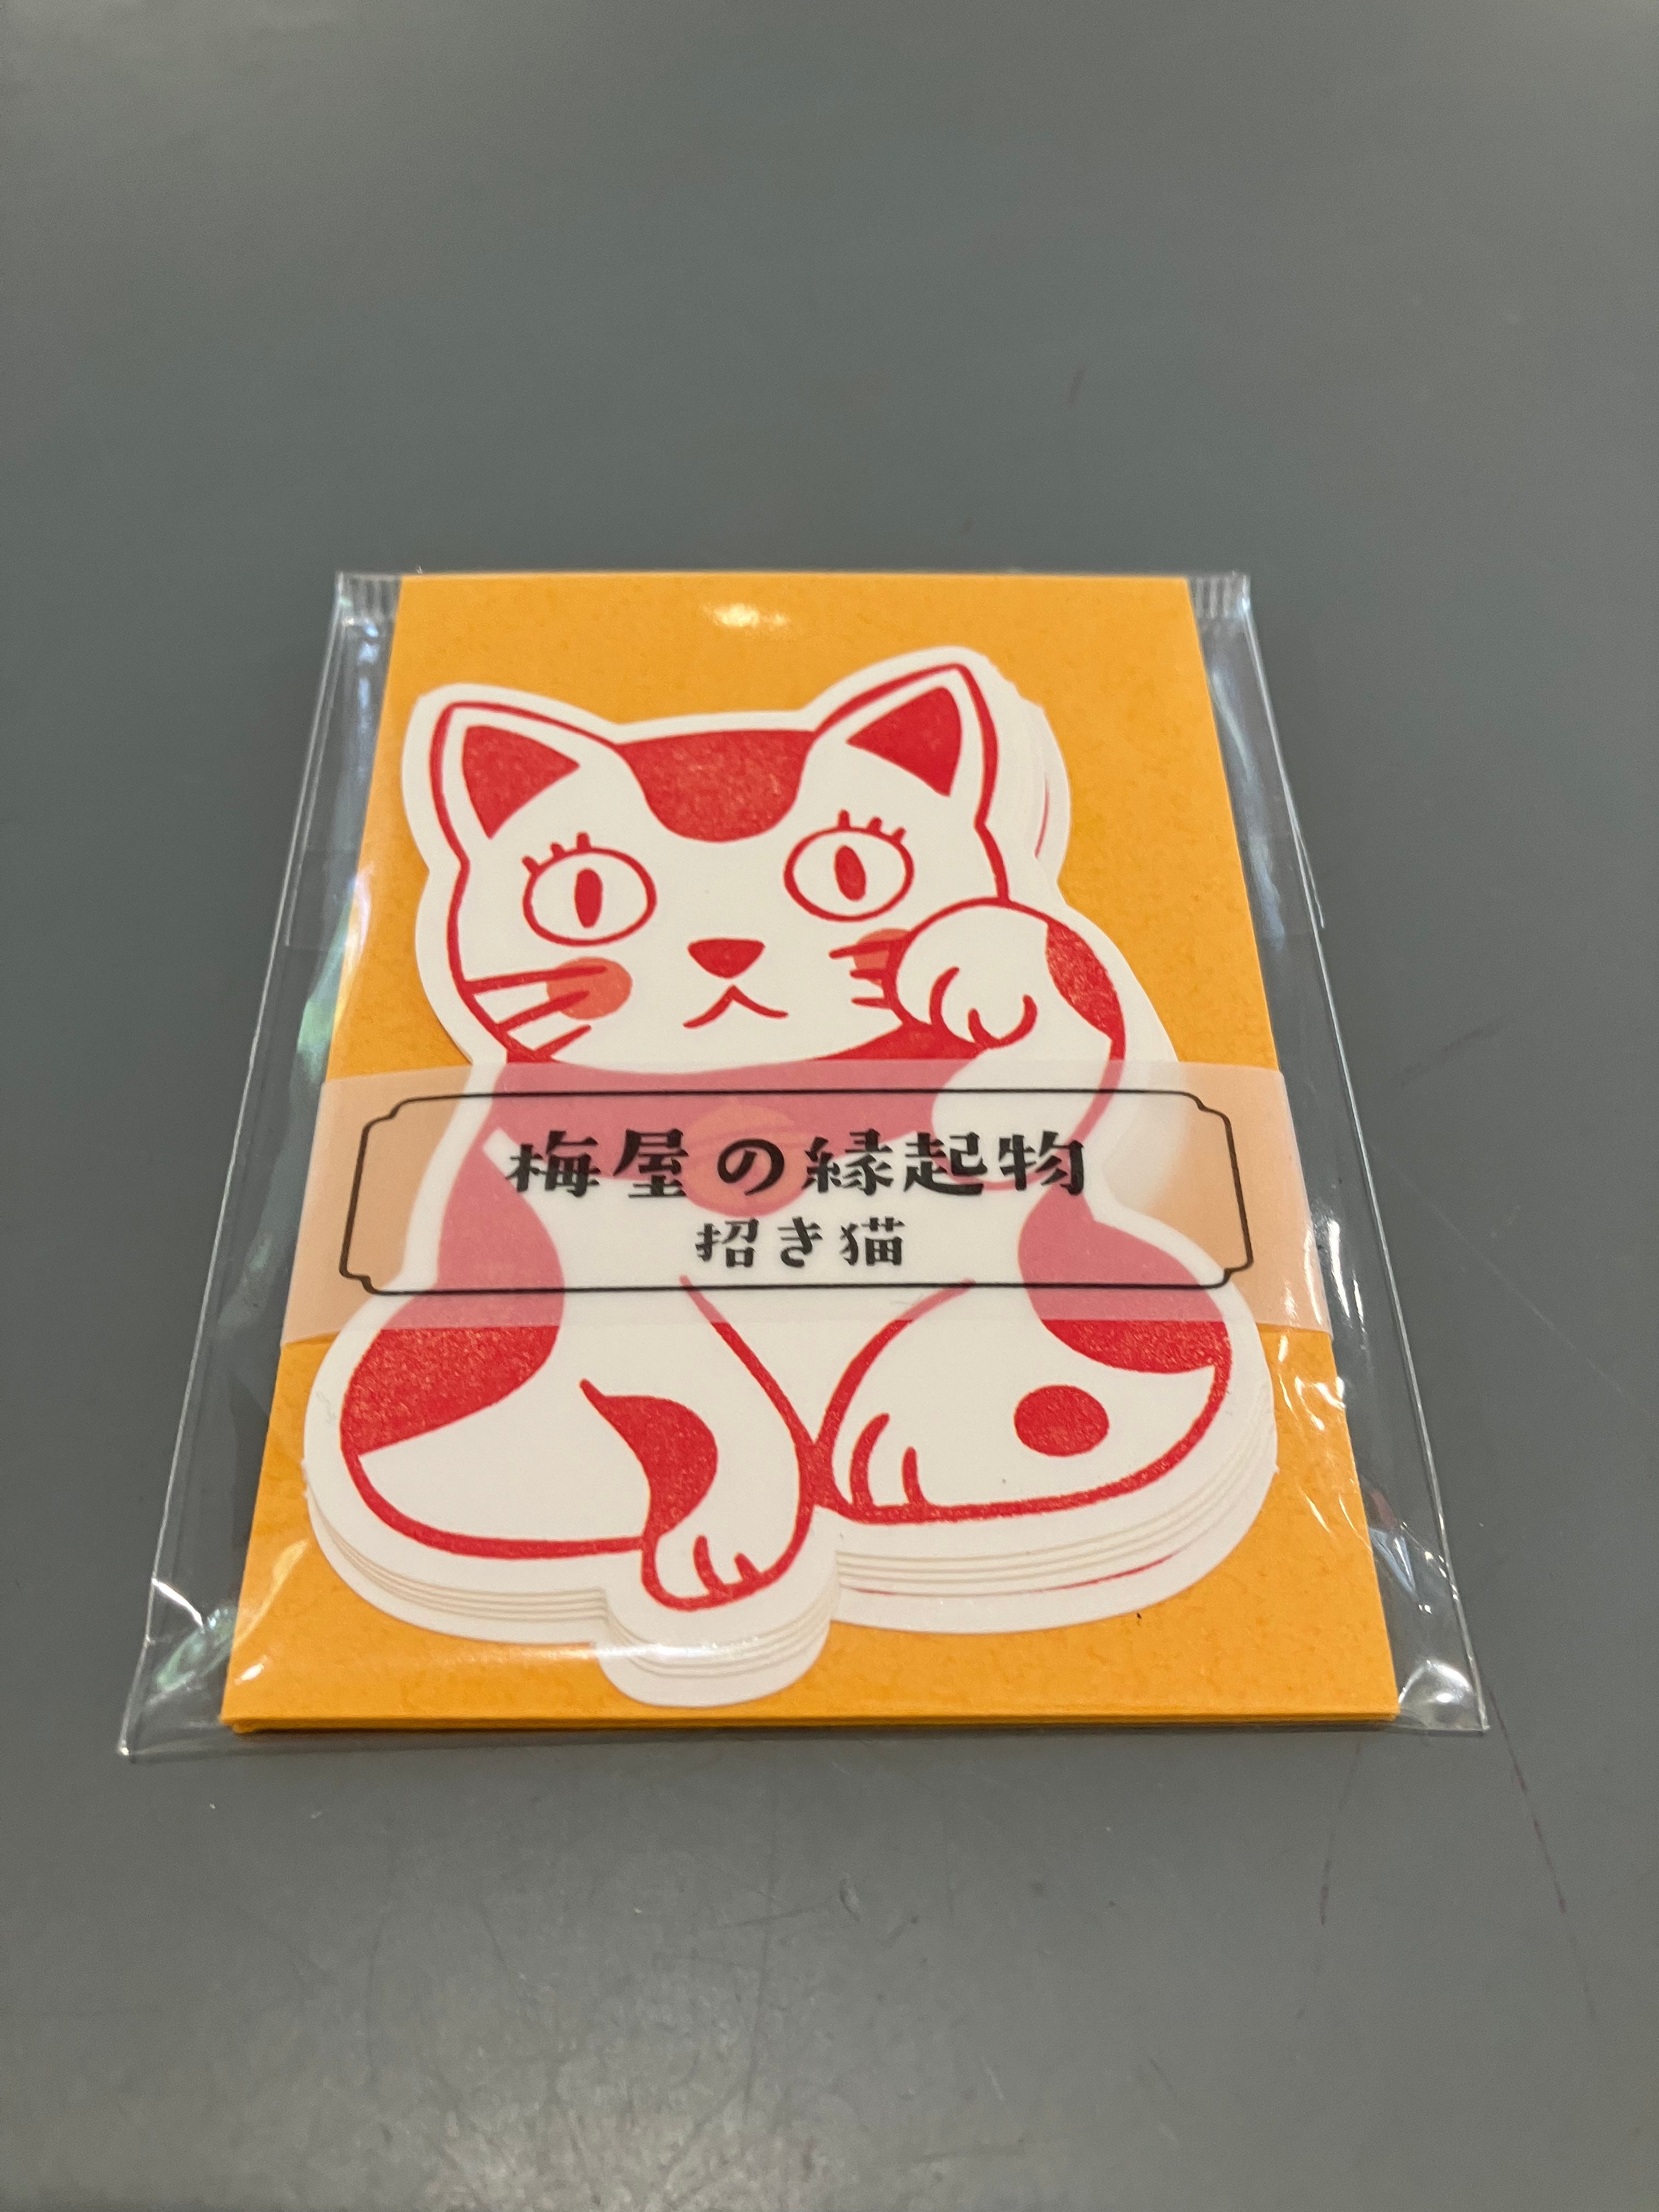 Card with red cat and orange envelopes